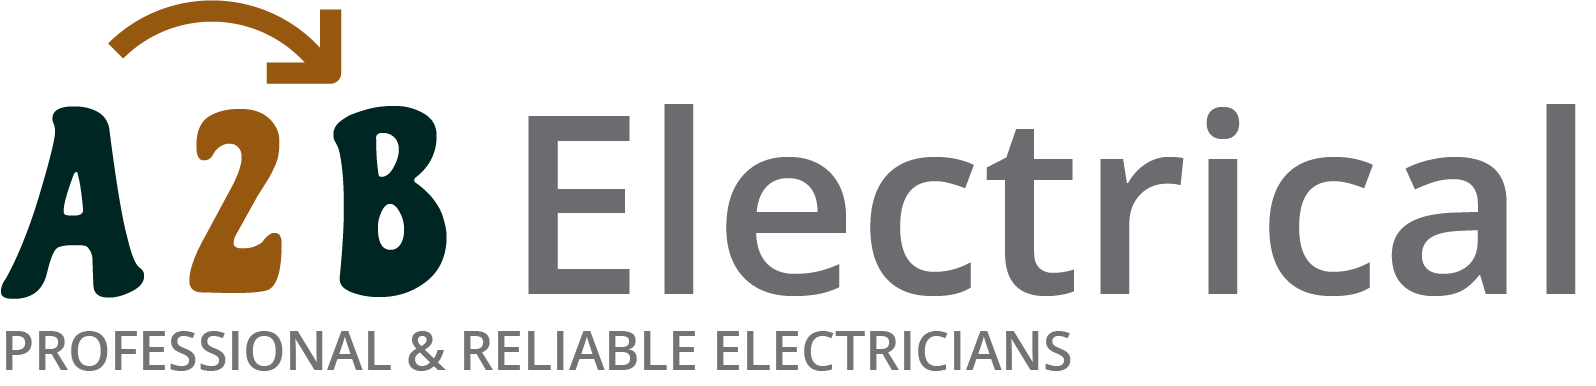 If you have electrical wiring problems in Cricklewood, we can provide an electrician to have a look for you. 